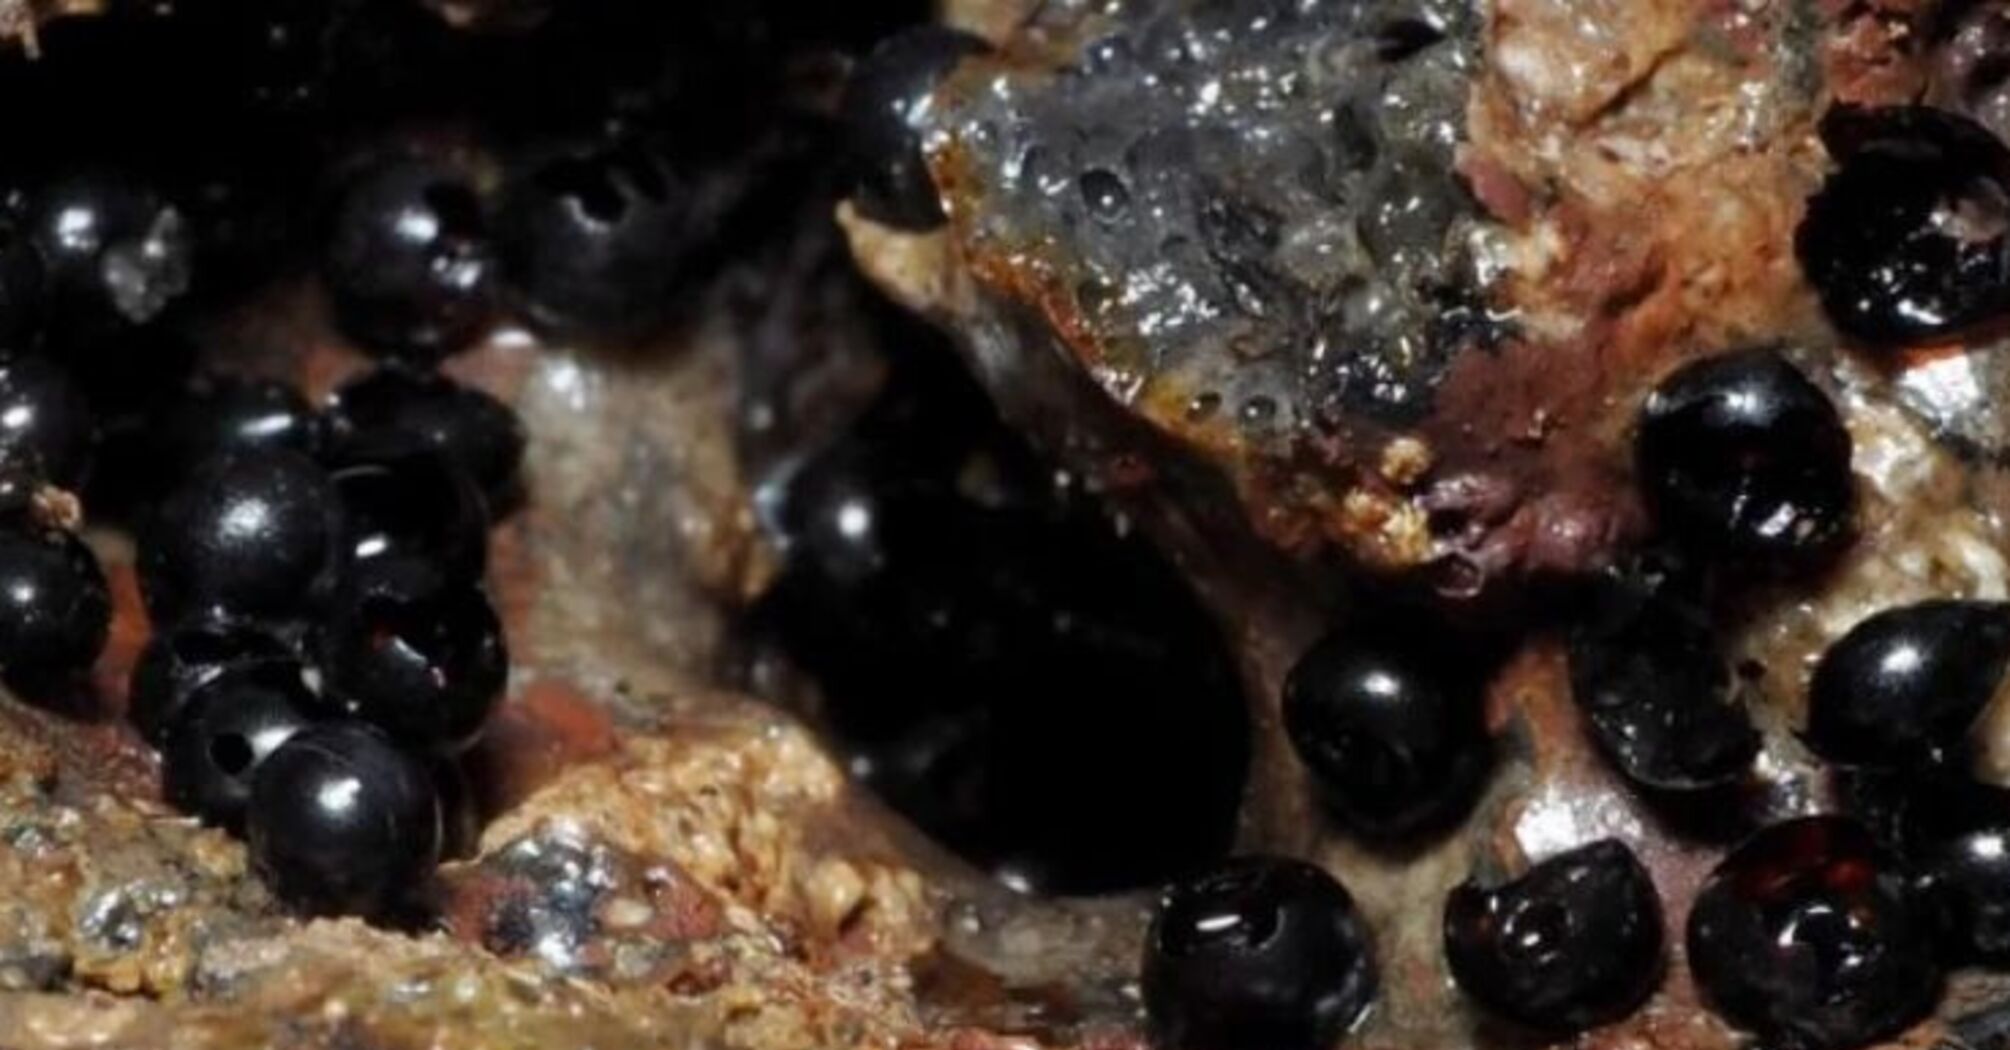 Mysterious black eggs with embryos found at the bottom of the ocean (photo)